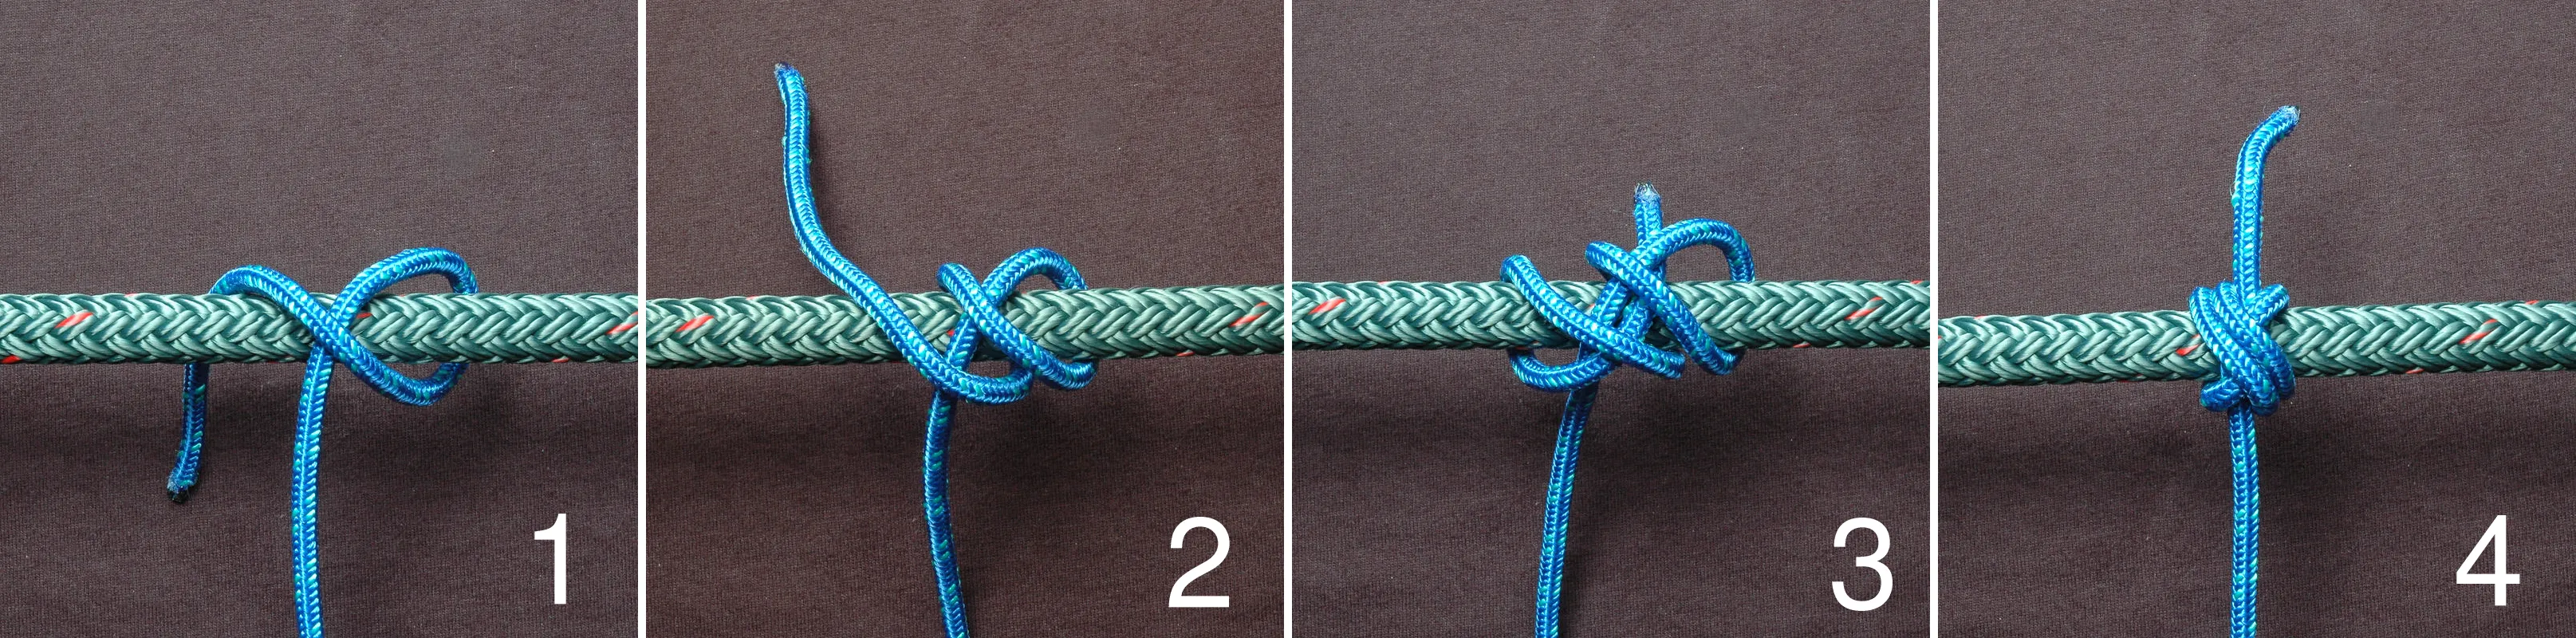 Huong Dan Nut Buoc Doi Constrictor Double Constrictor Knot